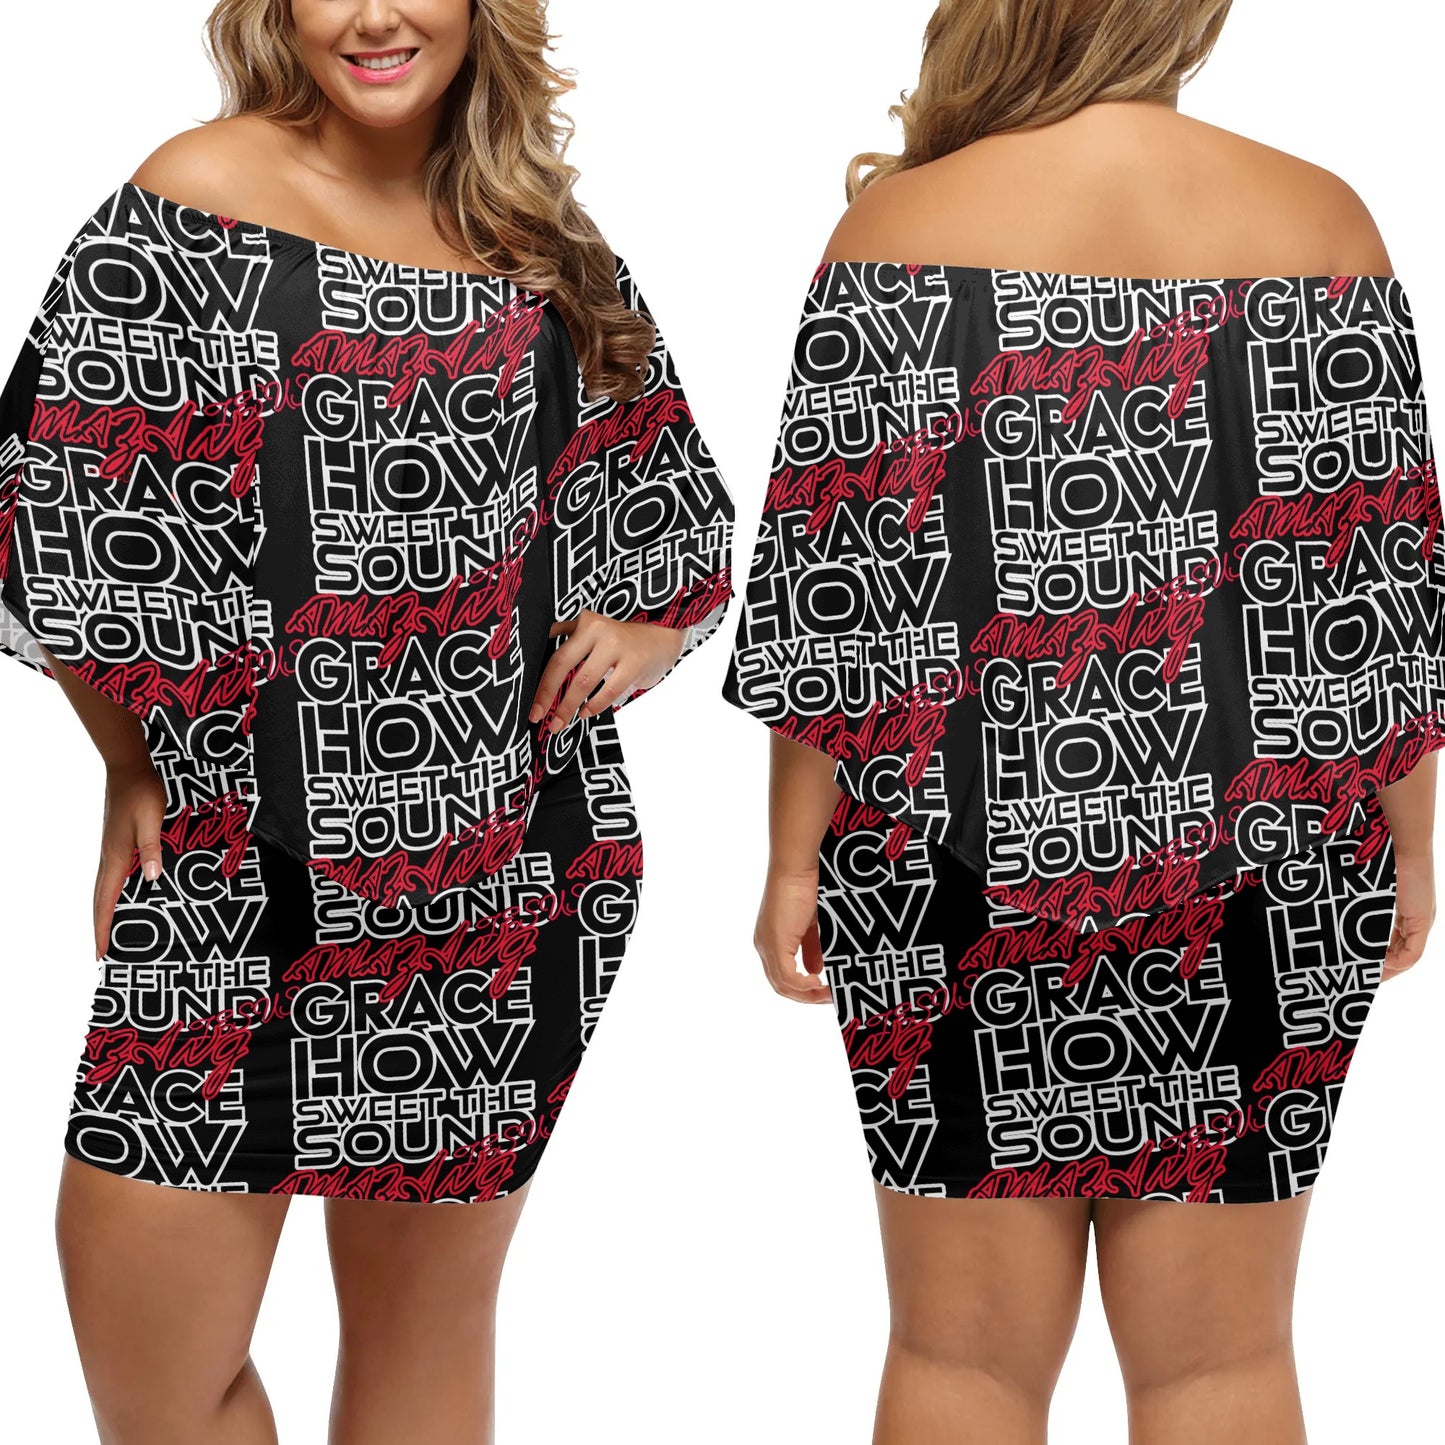 AMAZING GRACE- Womens Off The Shoulder Wrap Dress, FREE SHIPPING